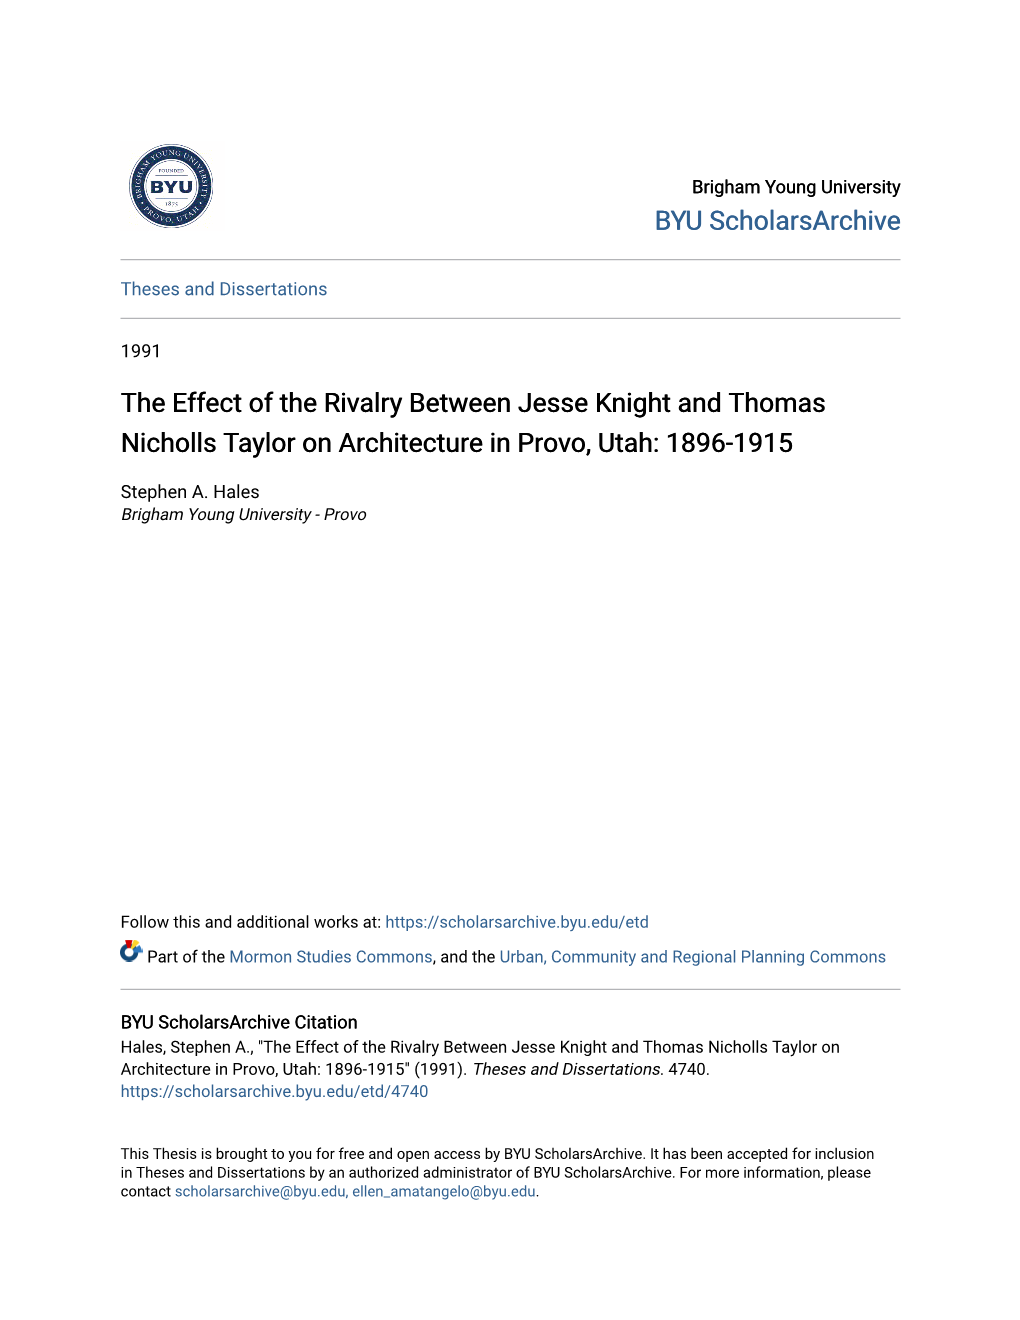 The Effect of the Rivalry Between Jesse Knight and Thomas Nicholls Taylor on Architecture in Provo, Utah: 1896-1915